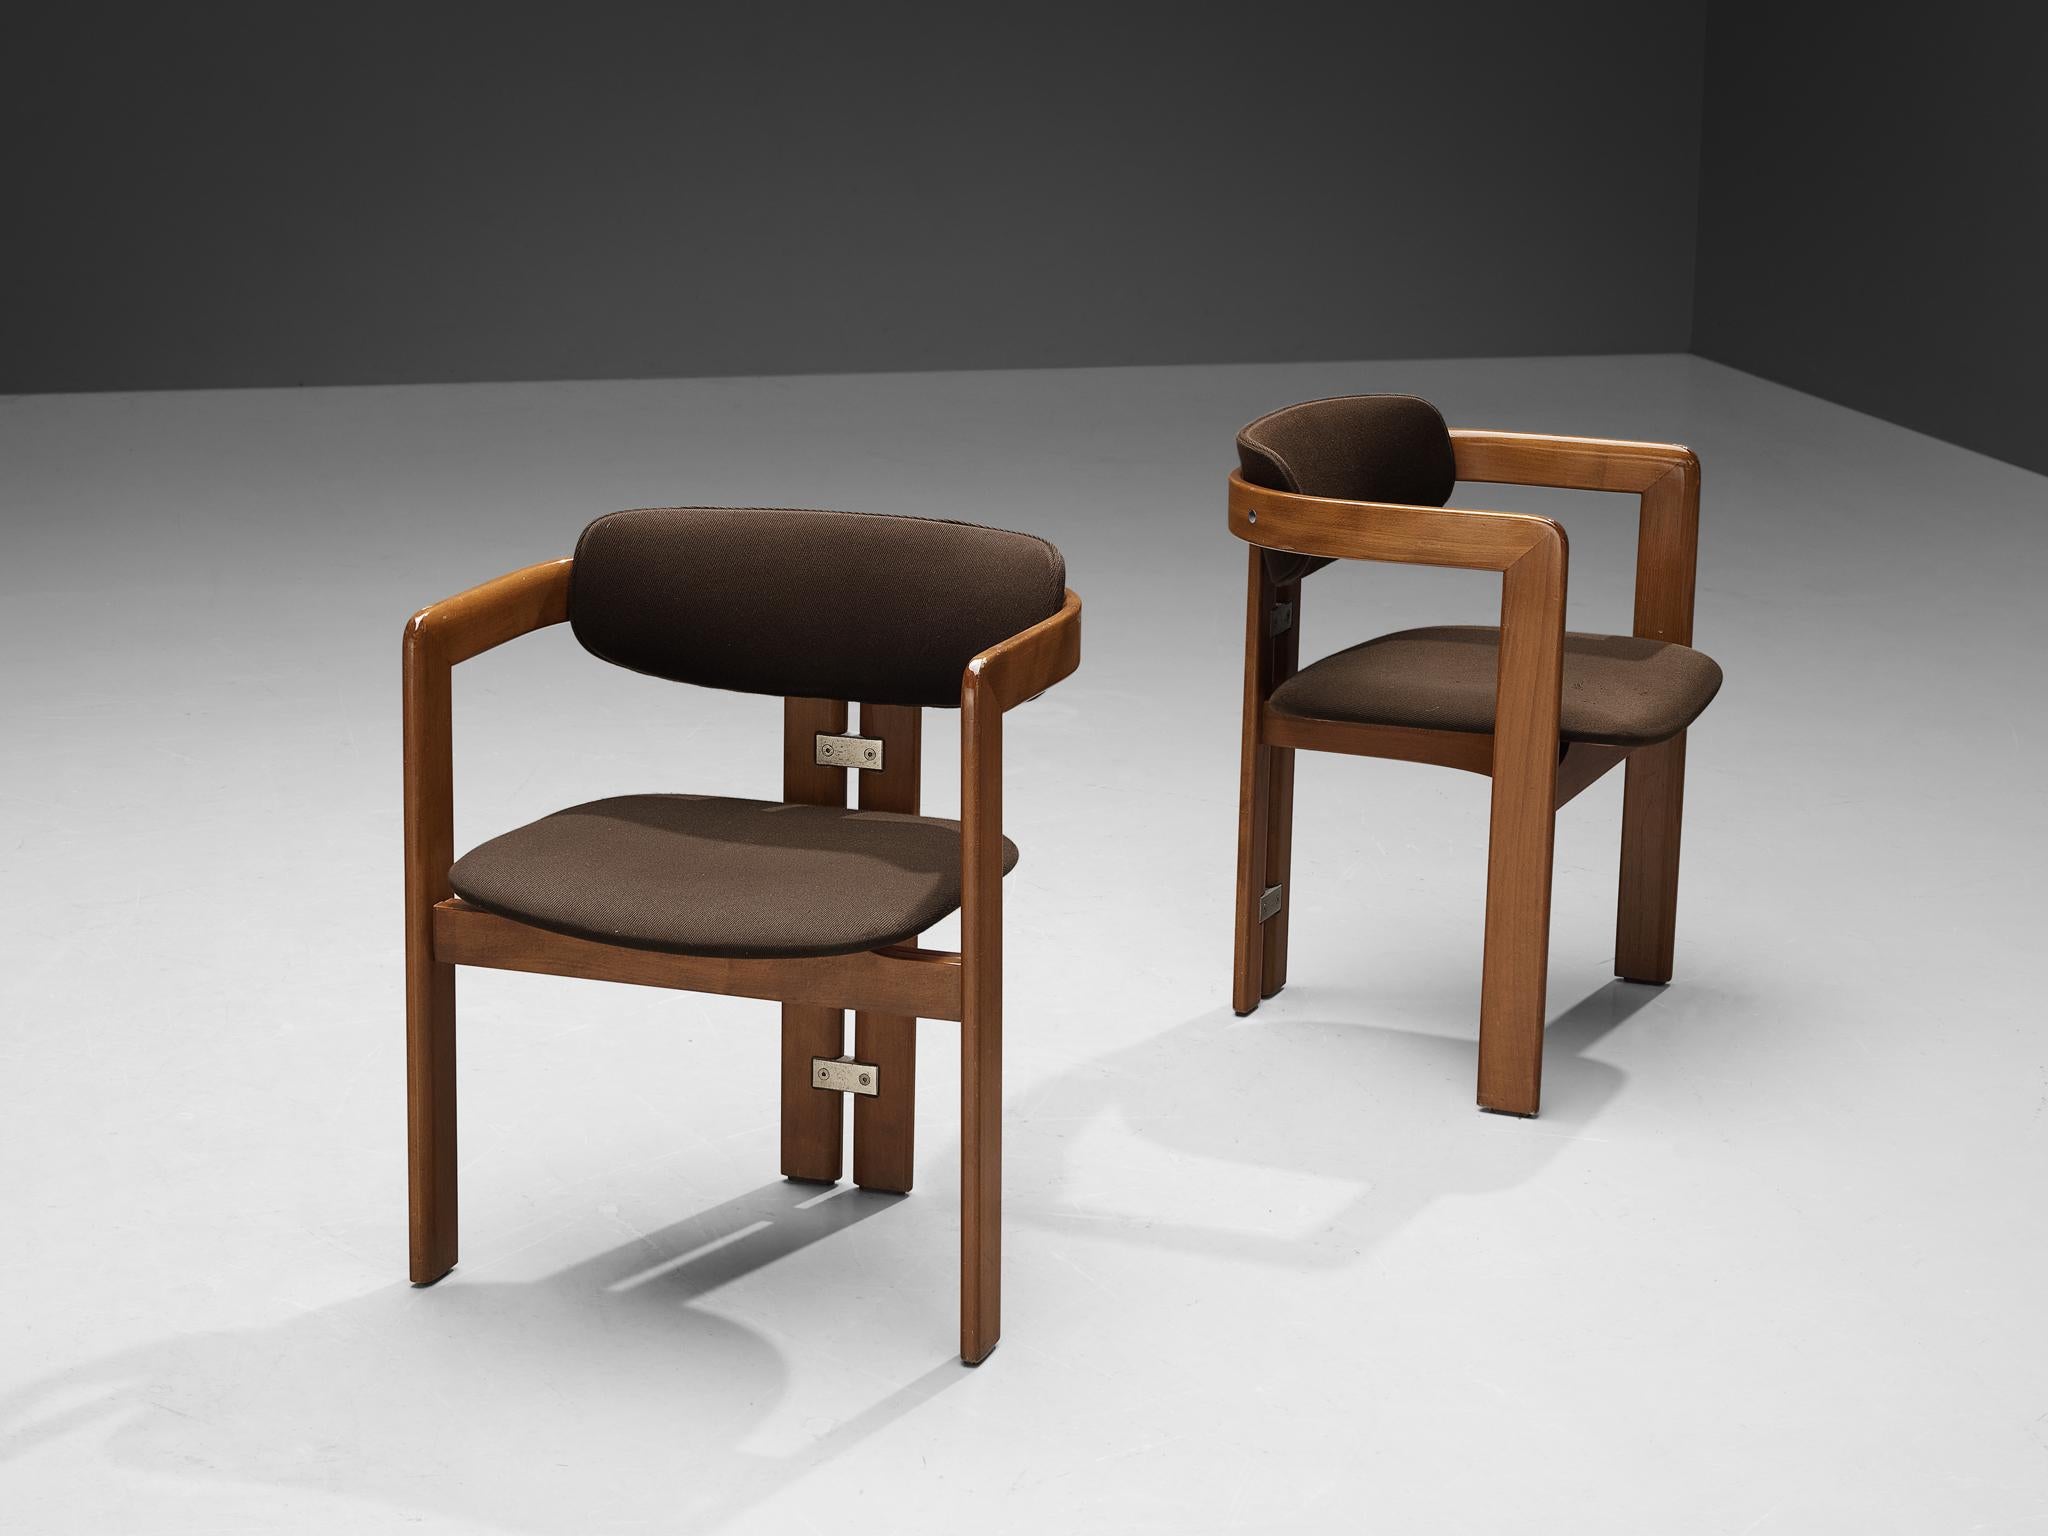 Augusto Savini for Pozzi, pair of 'Pamplona' dining chairs, walnut, fabric upholstery, aluminum, Italy, 1965. 

Pair of armchairs in walnut and brown fabric upholstery. A characteristic design; simplistic yet very strong in lines and proportions.